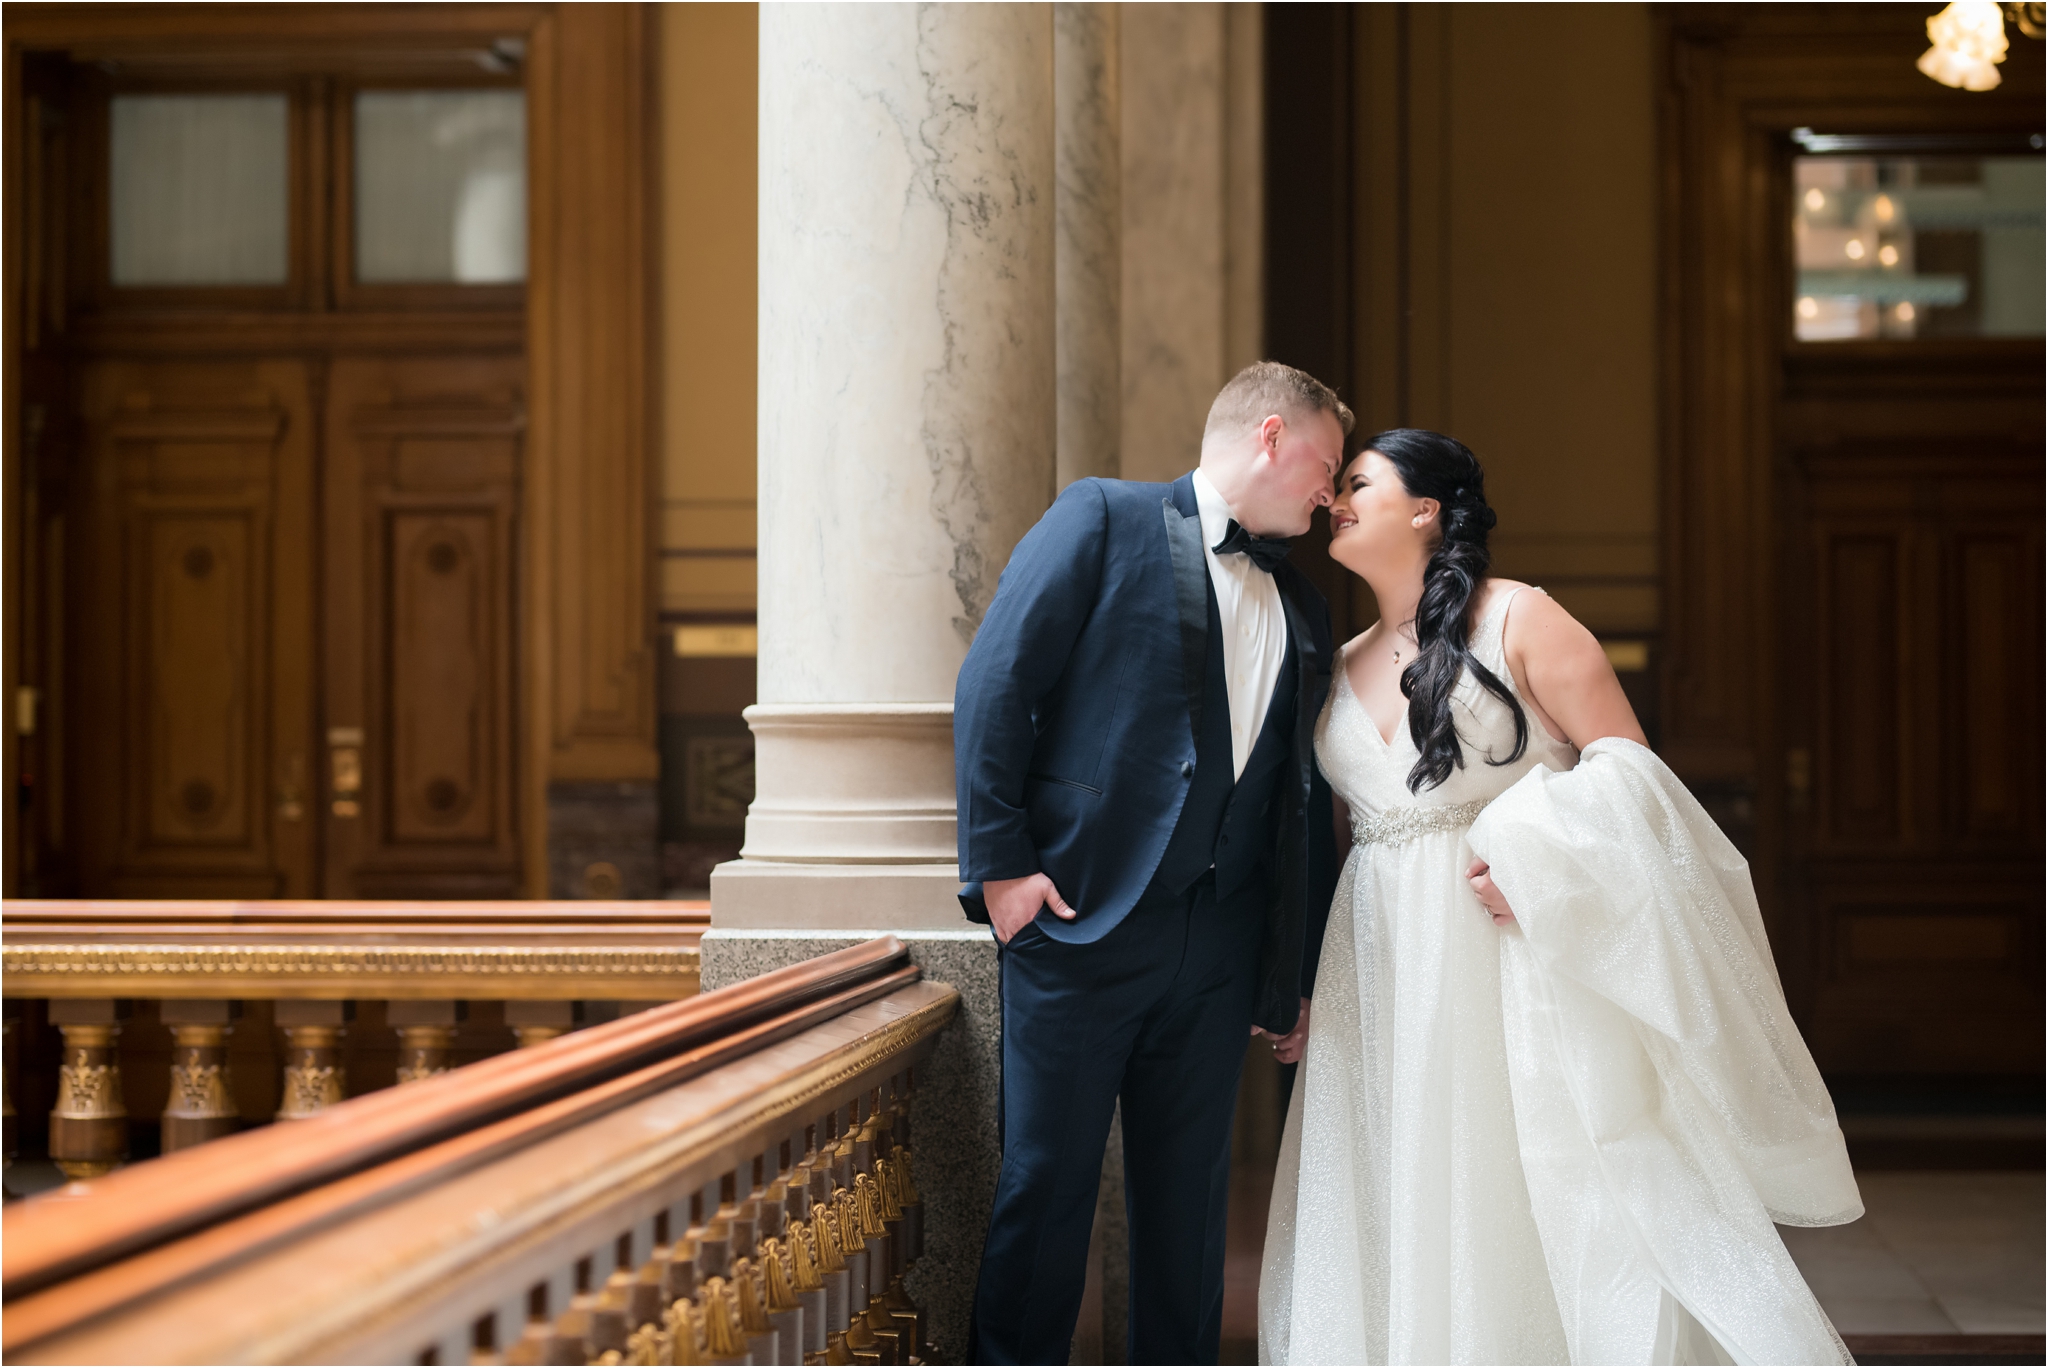 Indiana State House Ceremony | Sarah and Rachel Wedding Photographers | Indianapolis, IN | Beautiful wedding day Bridal Portraits